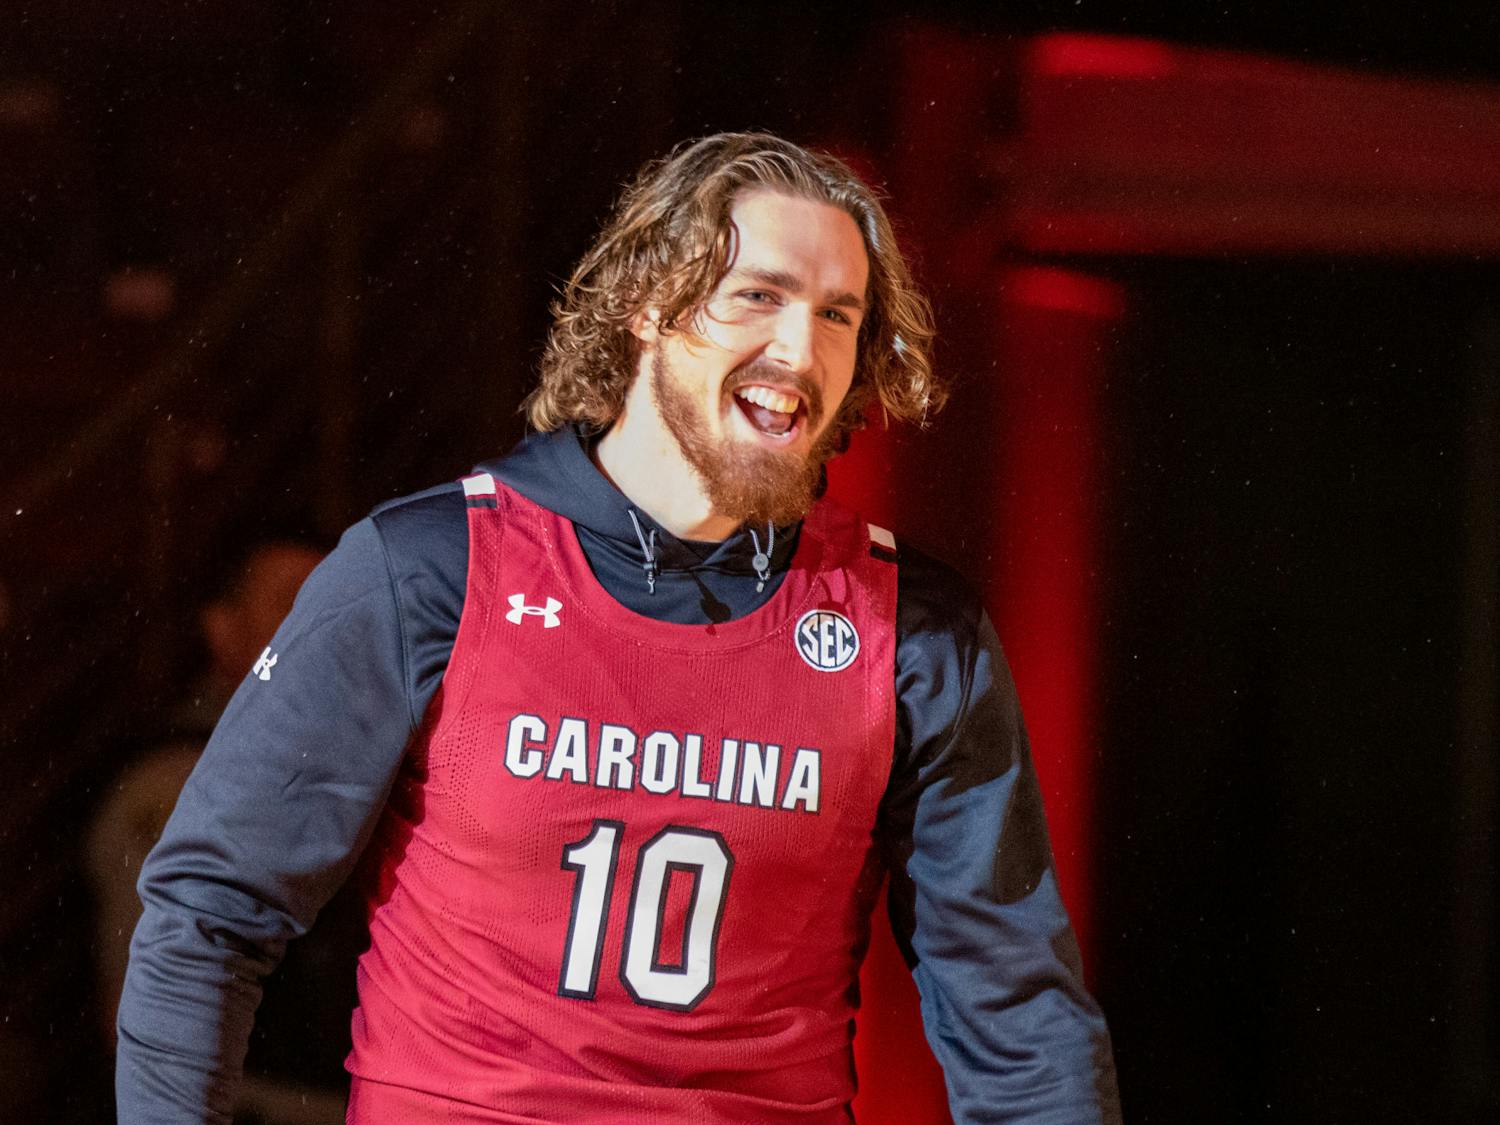 Graduate student forward Hayden Brown smiles as he steps on the court after being introduced to the small crowd on Oct. 26, 2022. The Gamecocks men's basketball team hosted the Garnet &amp; Black Madness event, including a scrimmage, dunk contest and three-point contest.